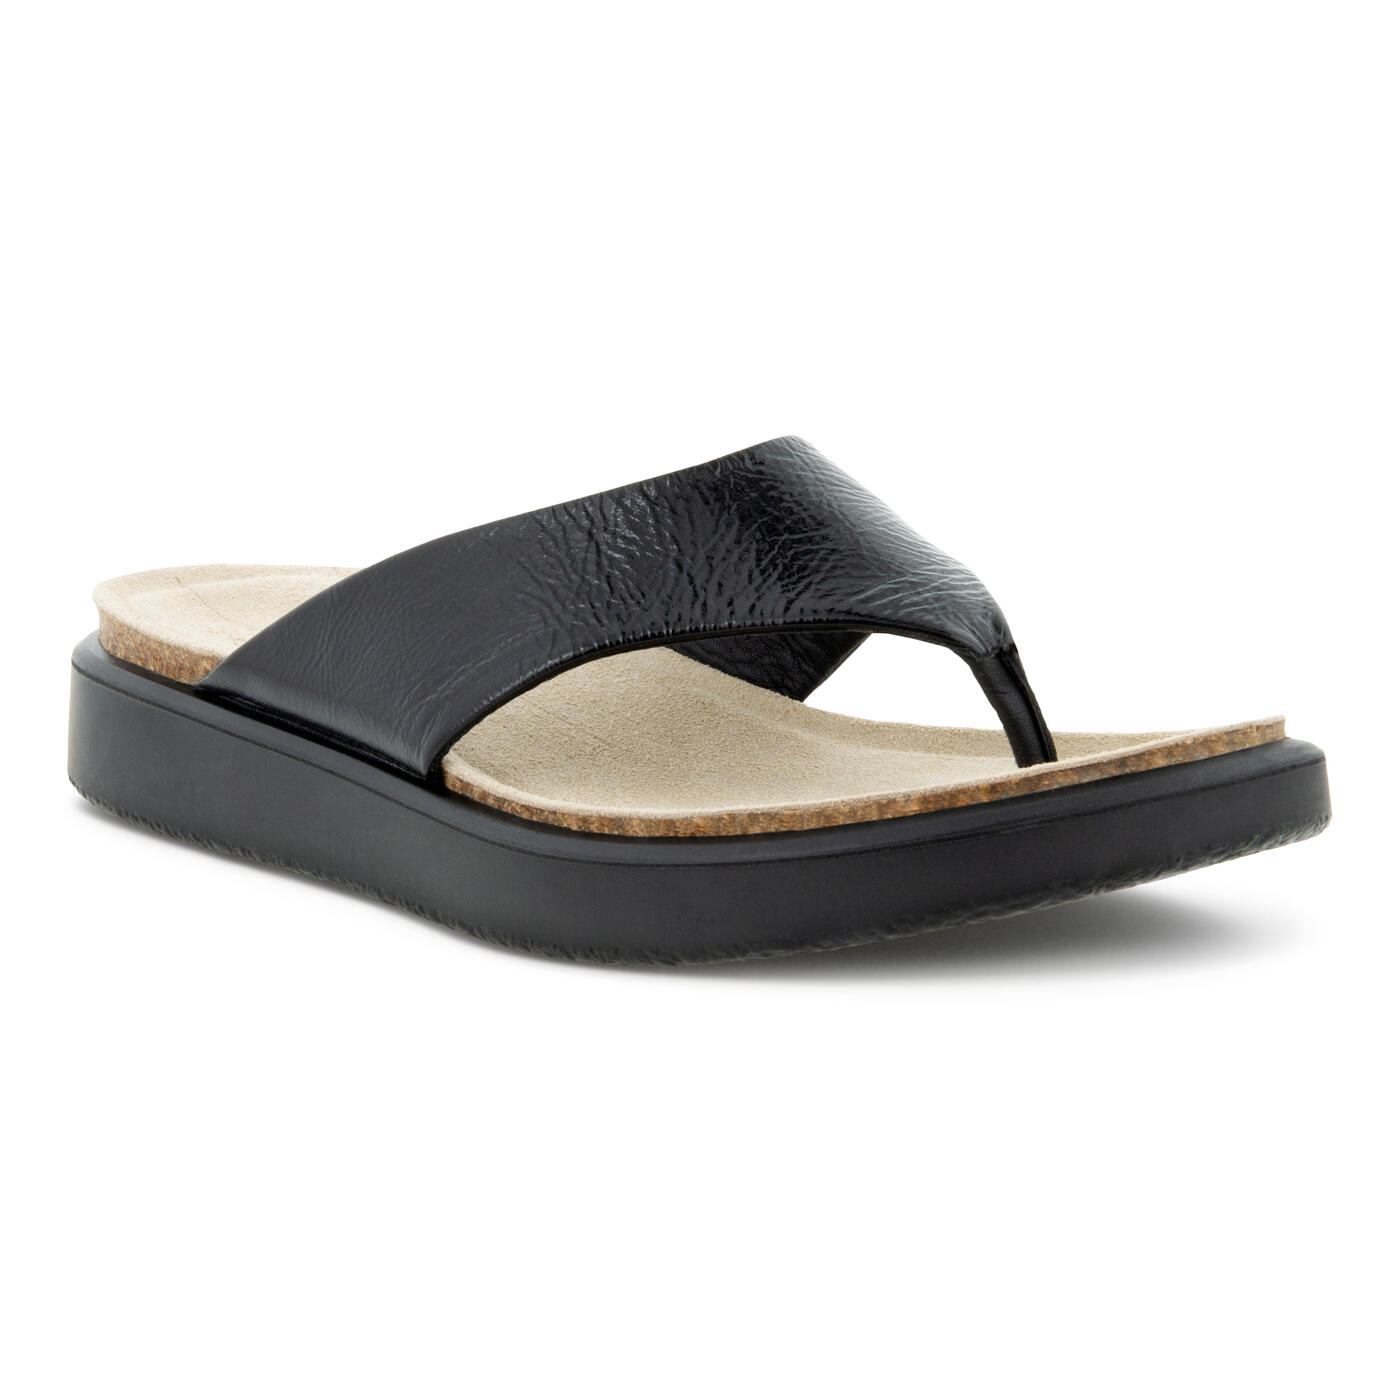 Women's Corksphere Thong Sandals | Order Today | ECCO® Shoes